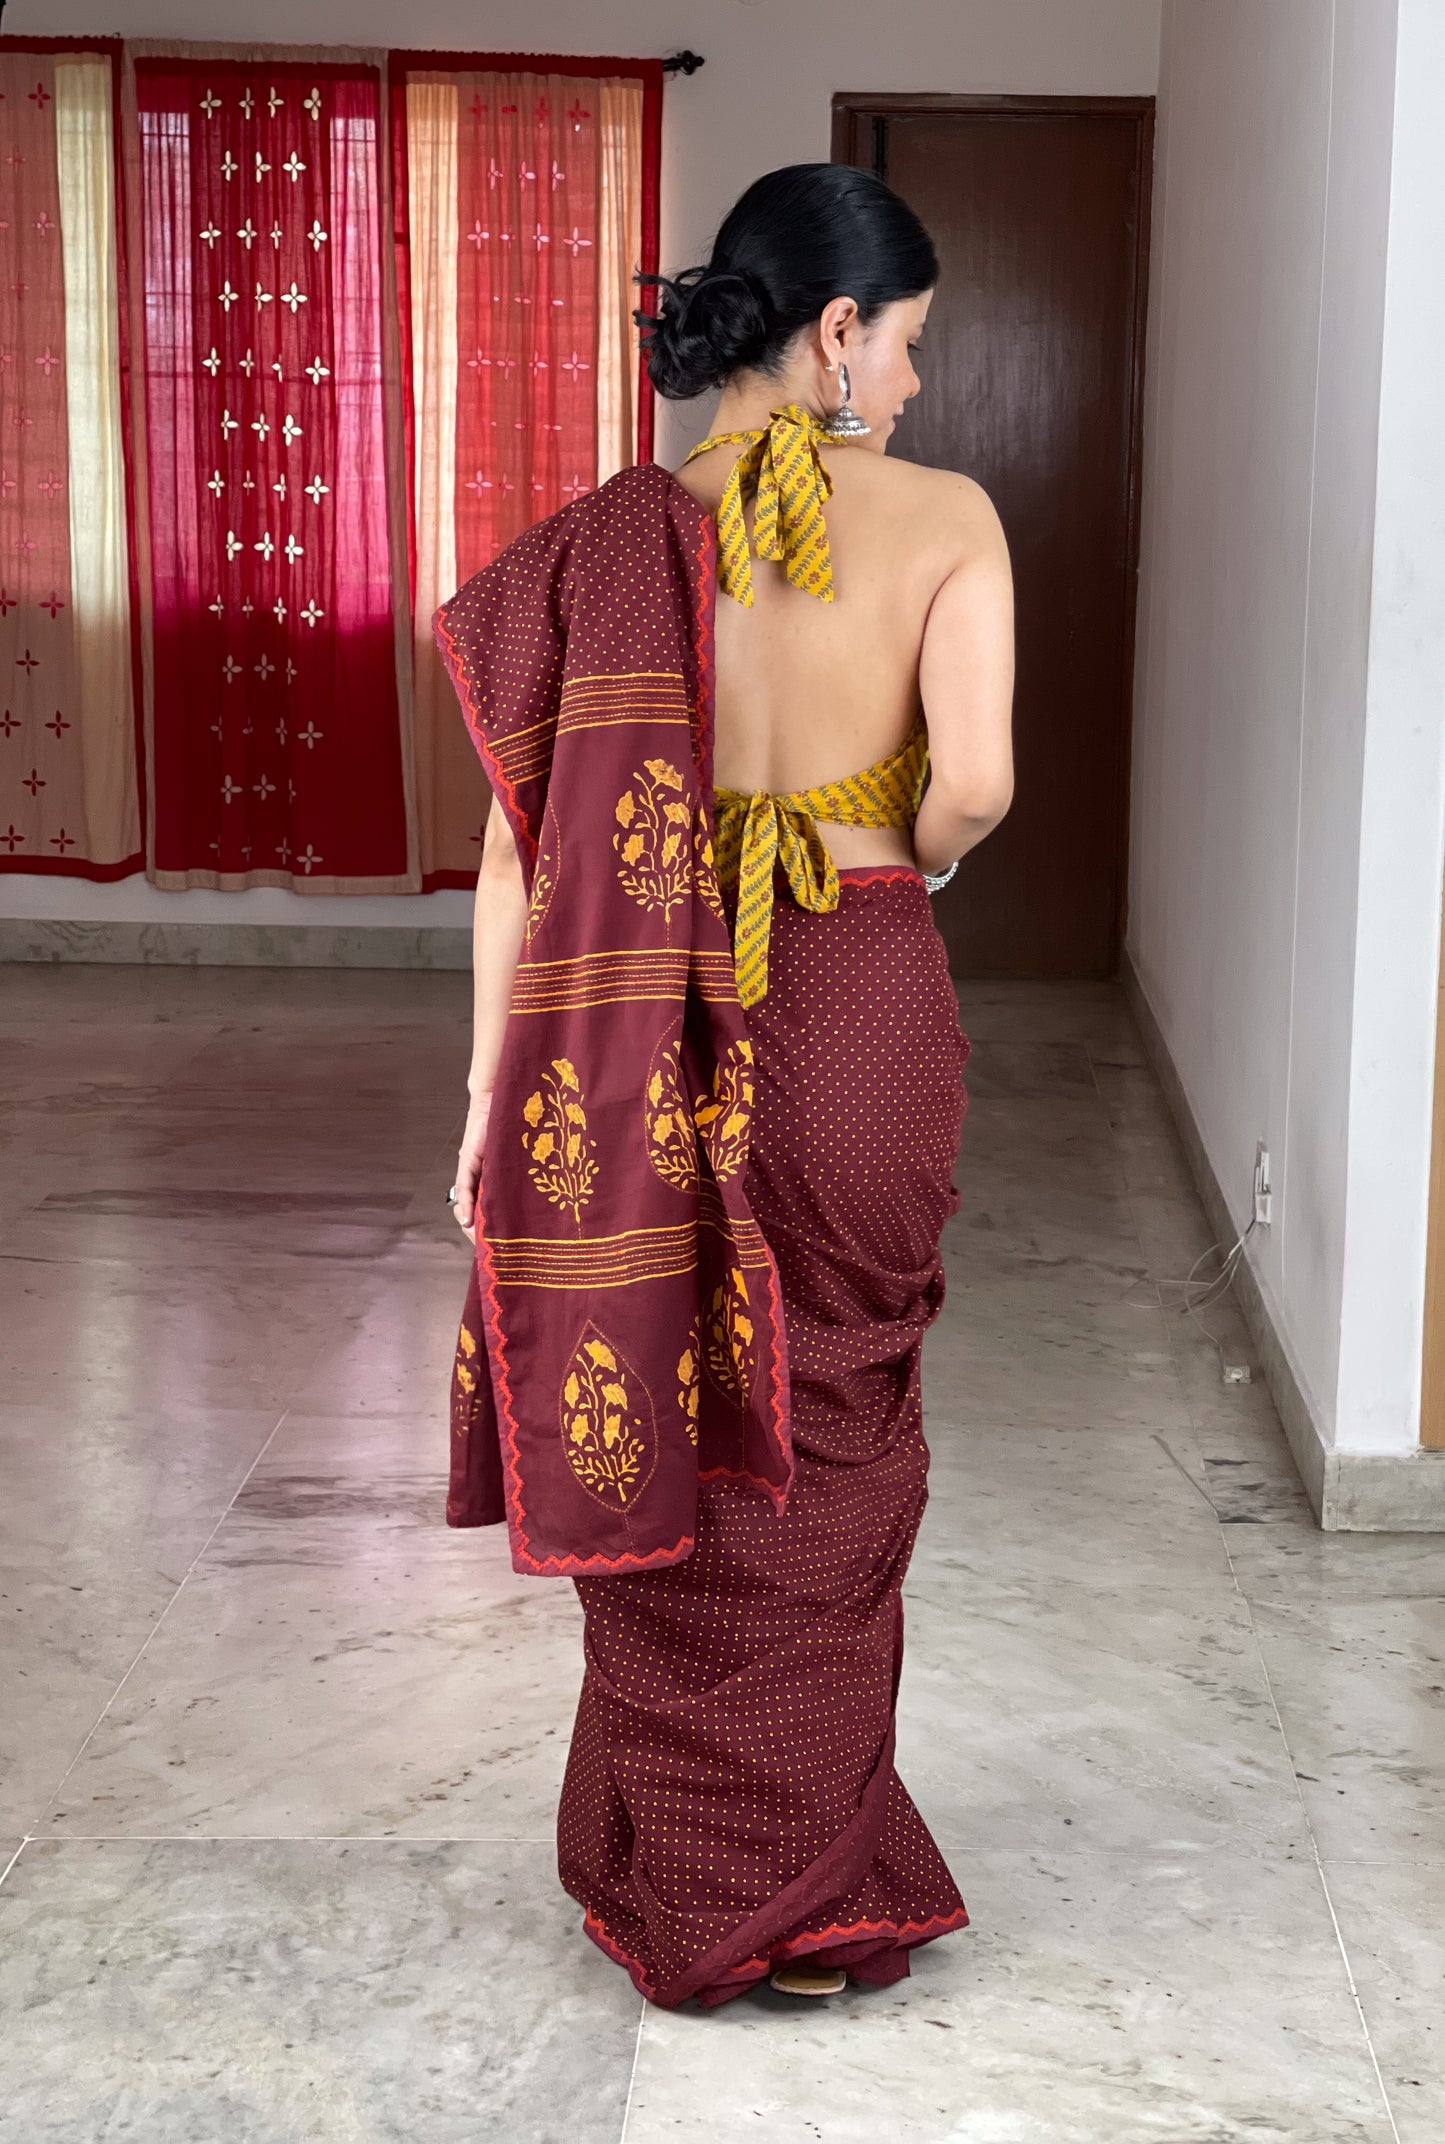 Handloom Cotton Sarees in handblock printed with hand embroidered appliue/cut work